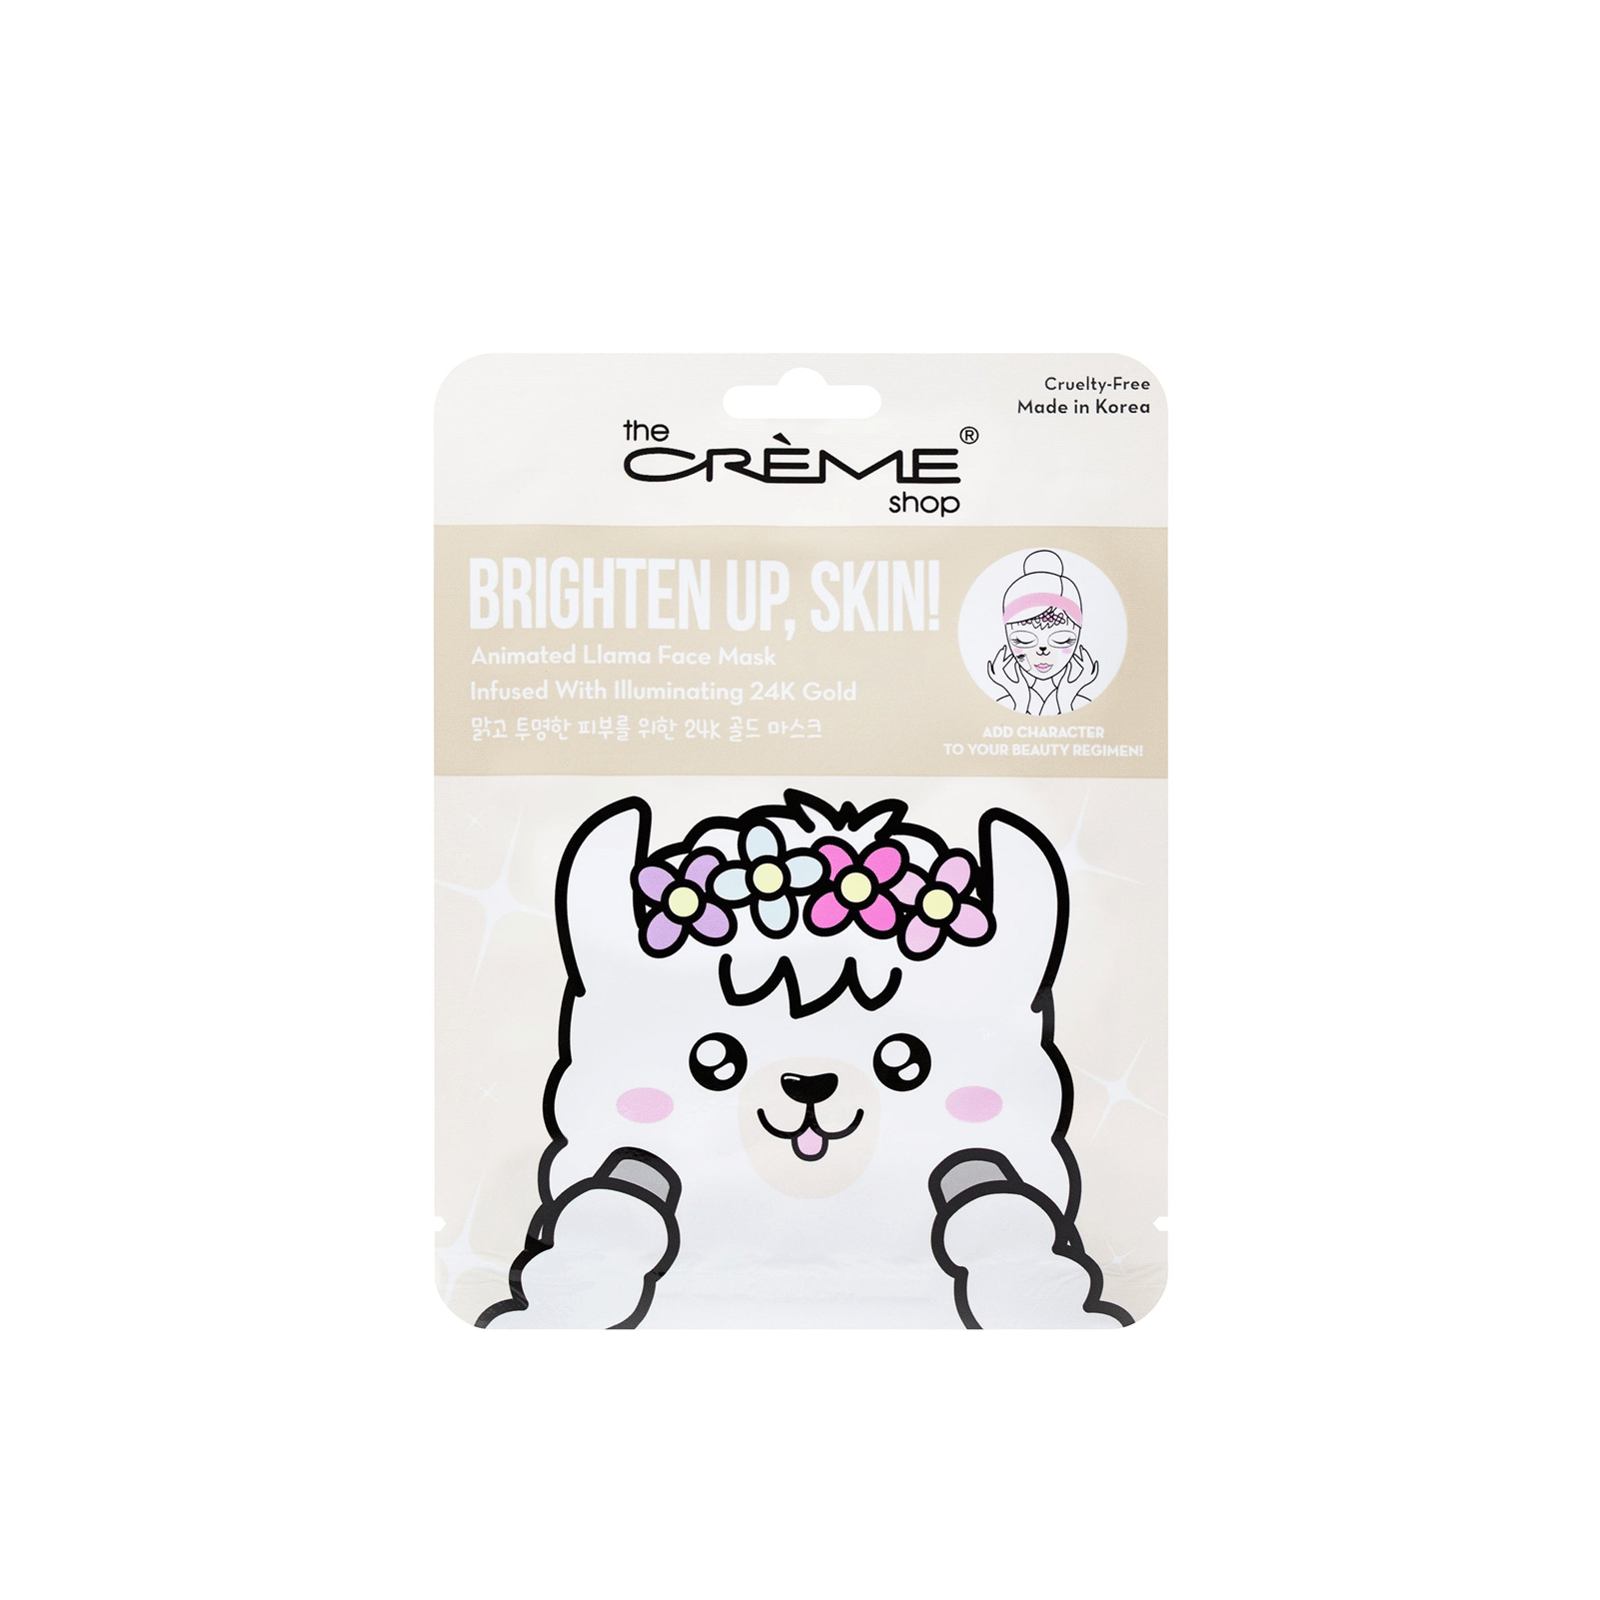 The Crème Shop Brighten Up, Skin! Animated Llama Face Mask 25g